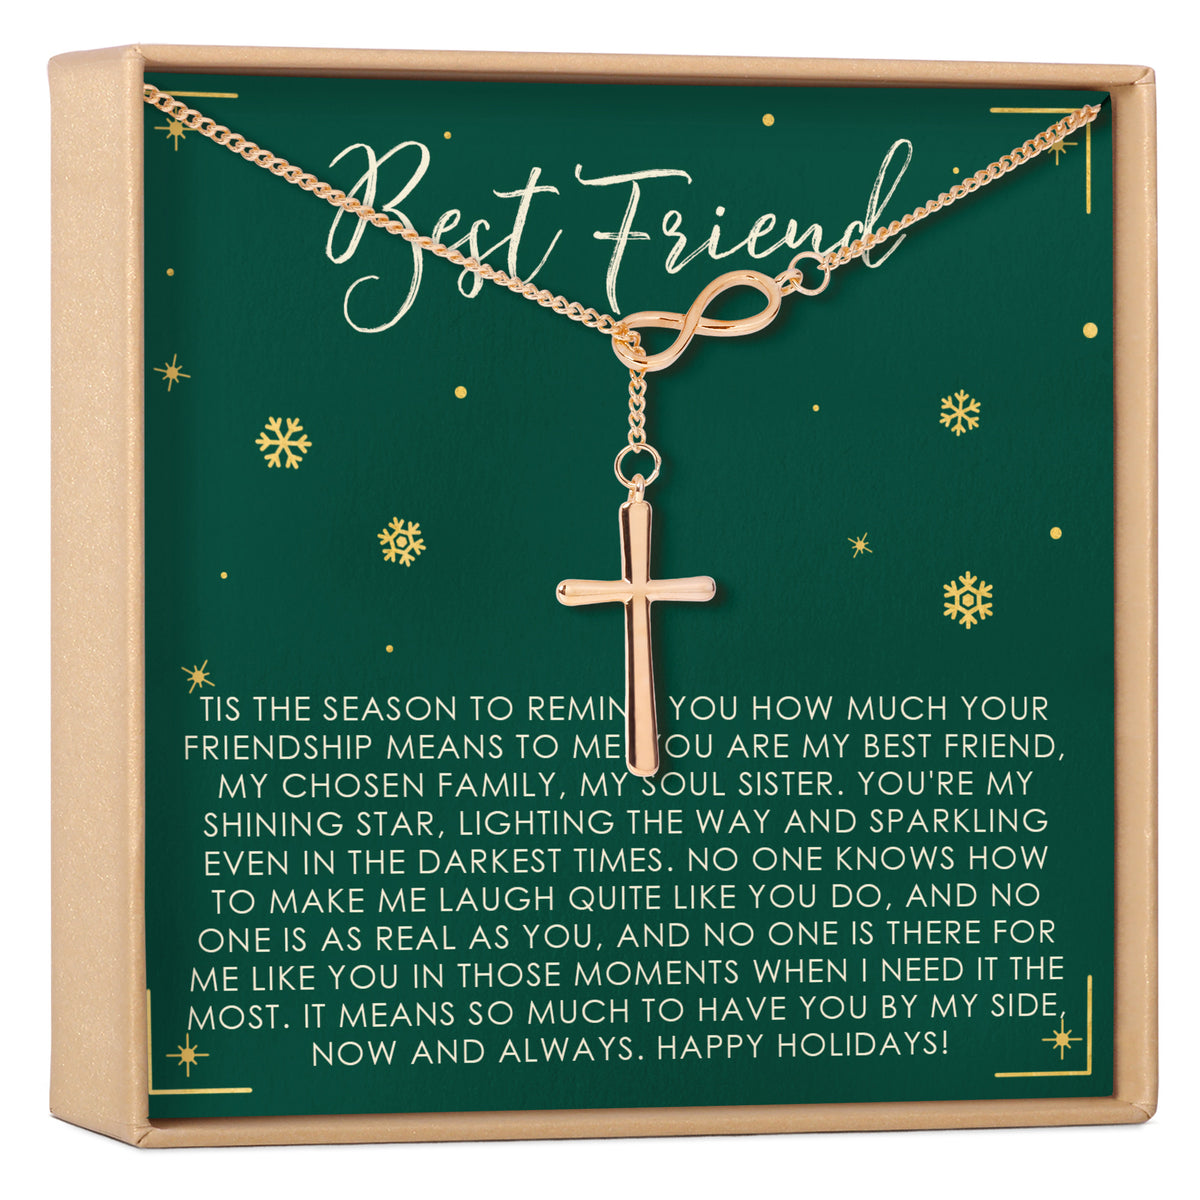 Personalized Christian gift idea | Happy holiday gifts, Personalized  christmas gifts, Meaningful christmas gifts